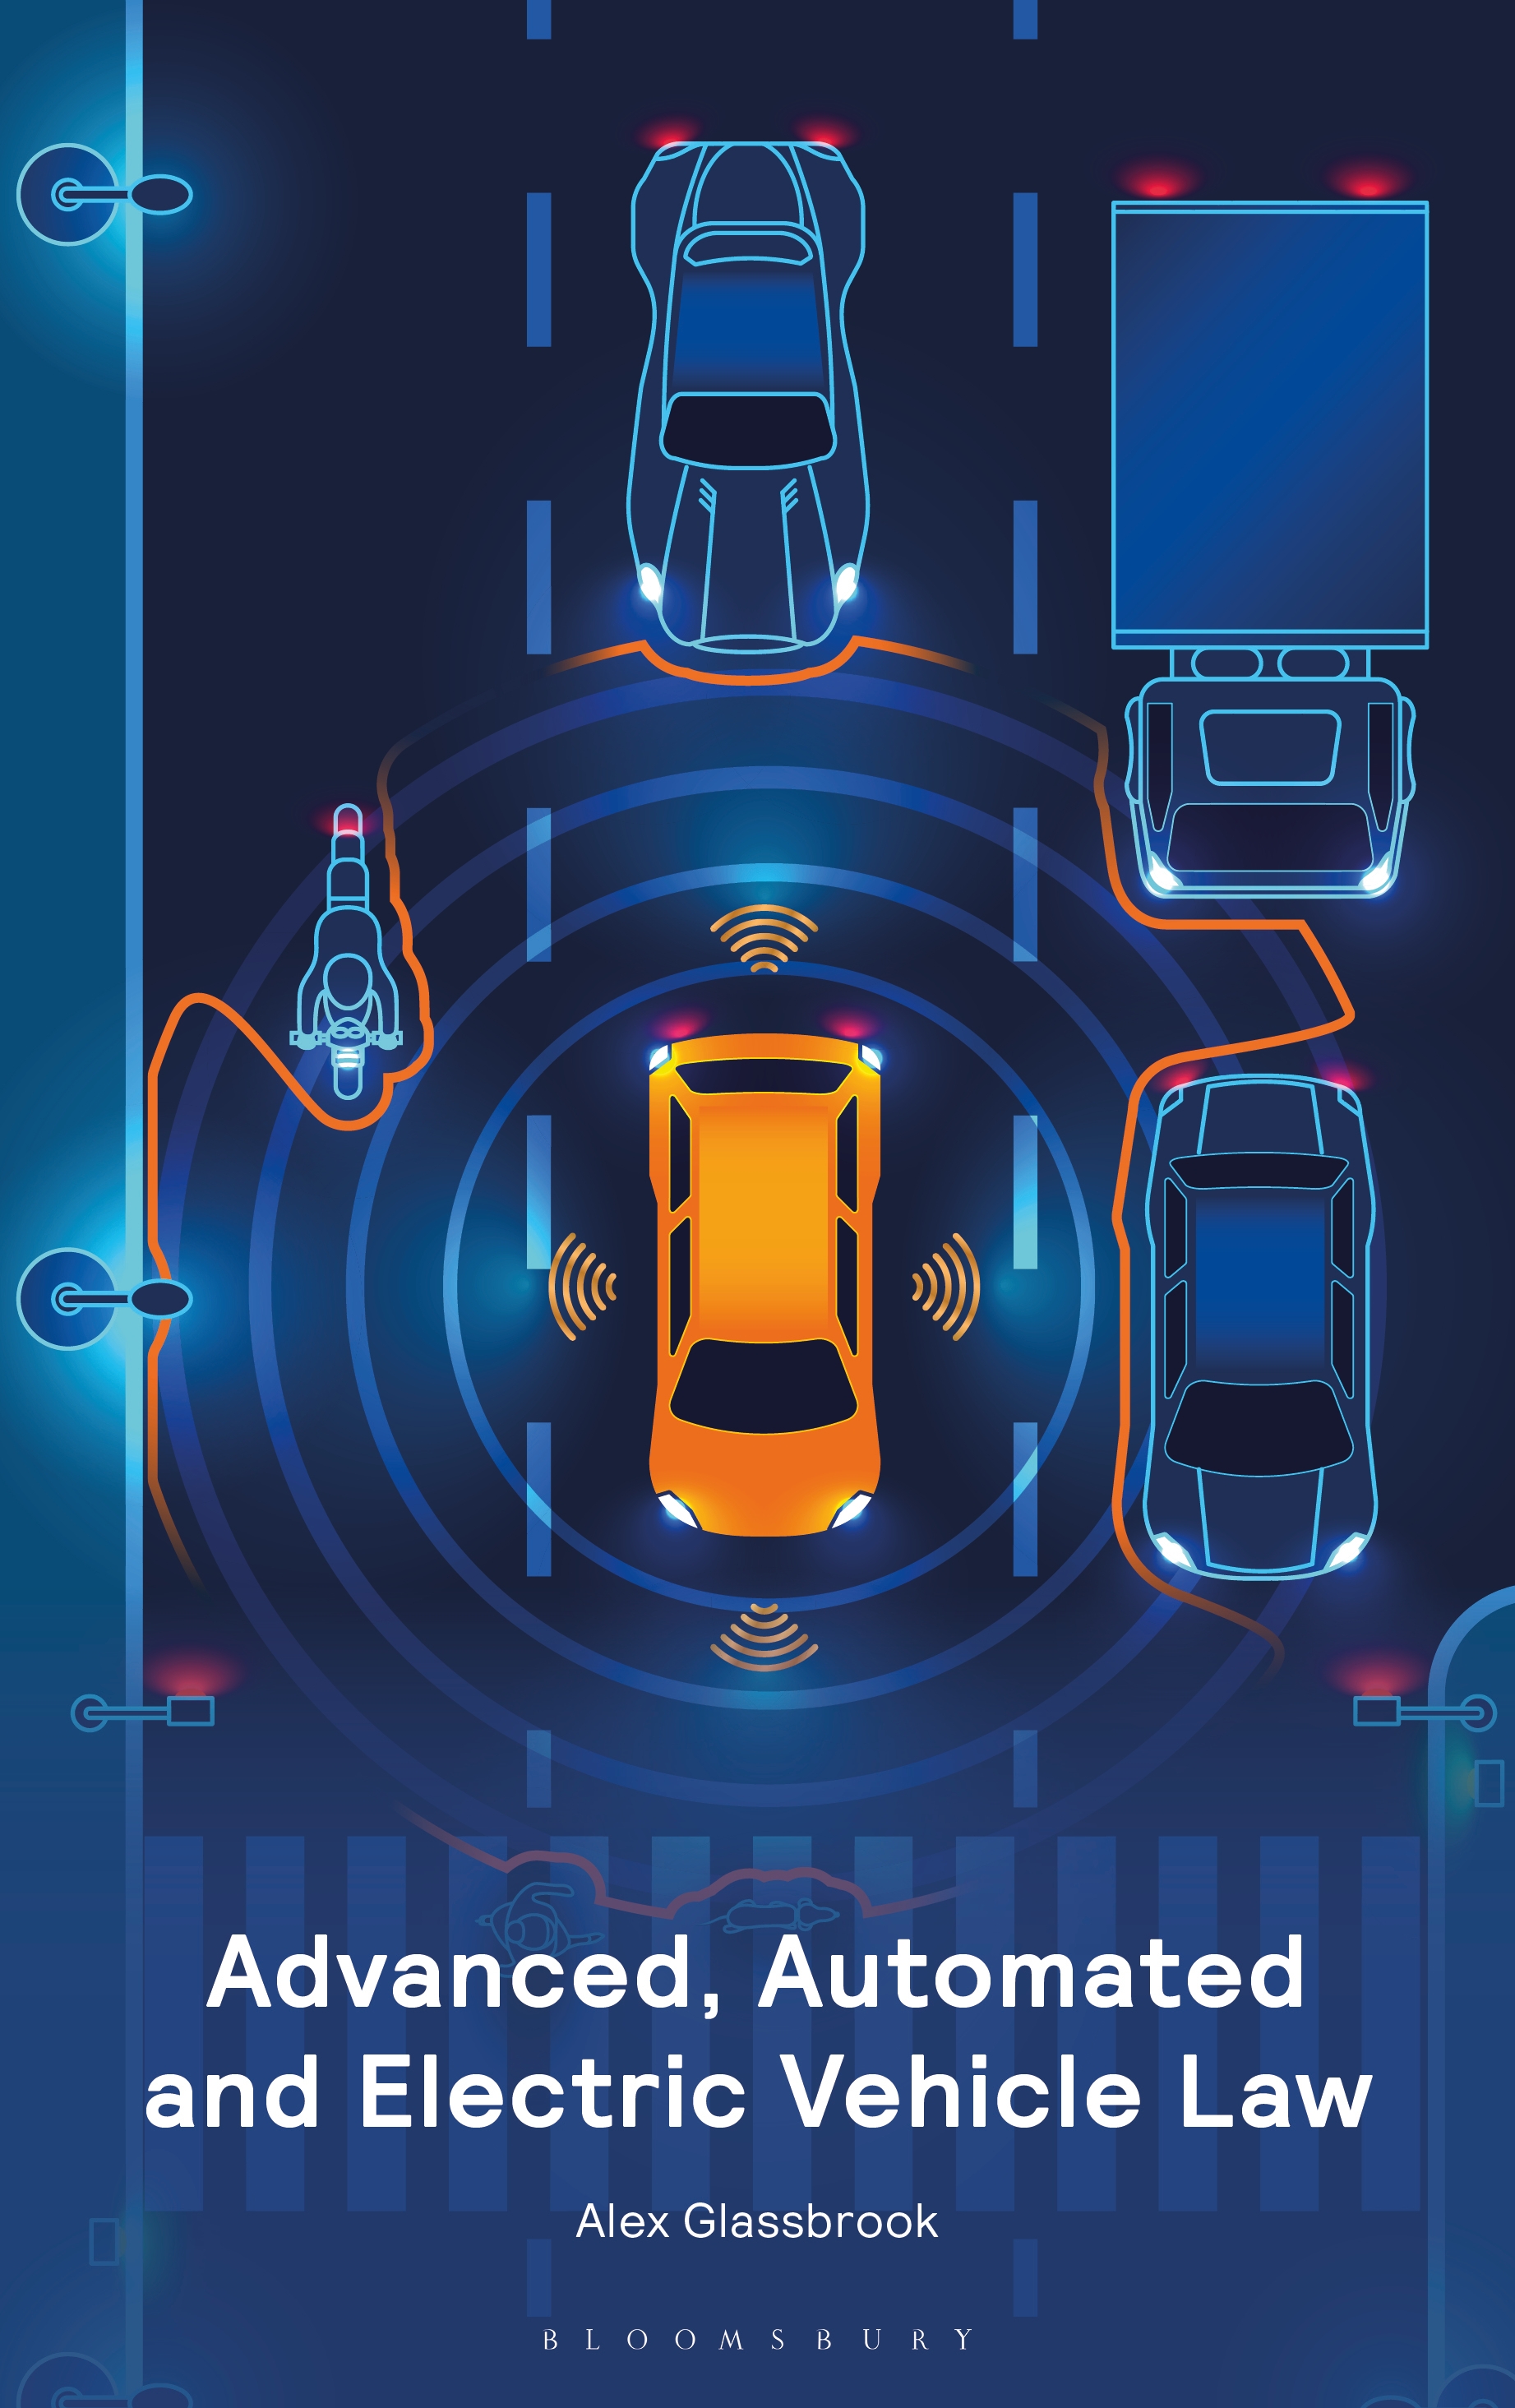 Advanced, Automated and Electric Vehicle Law book jacket